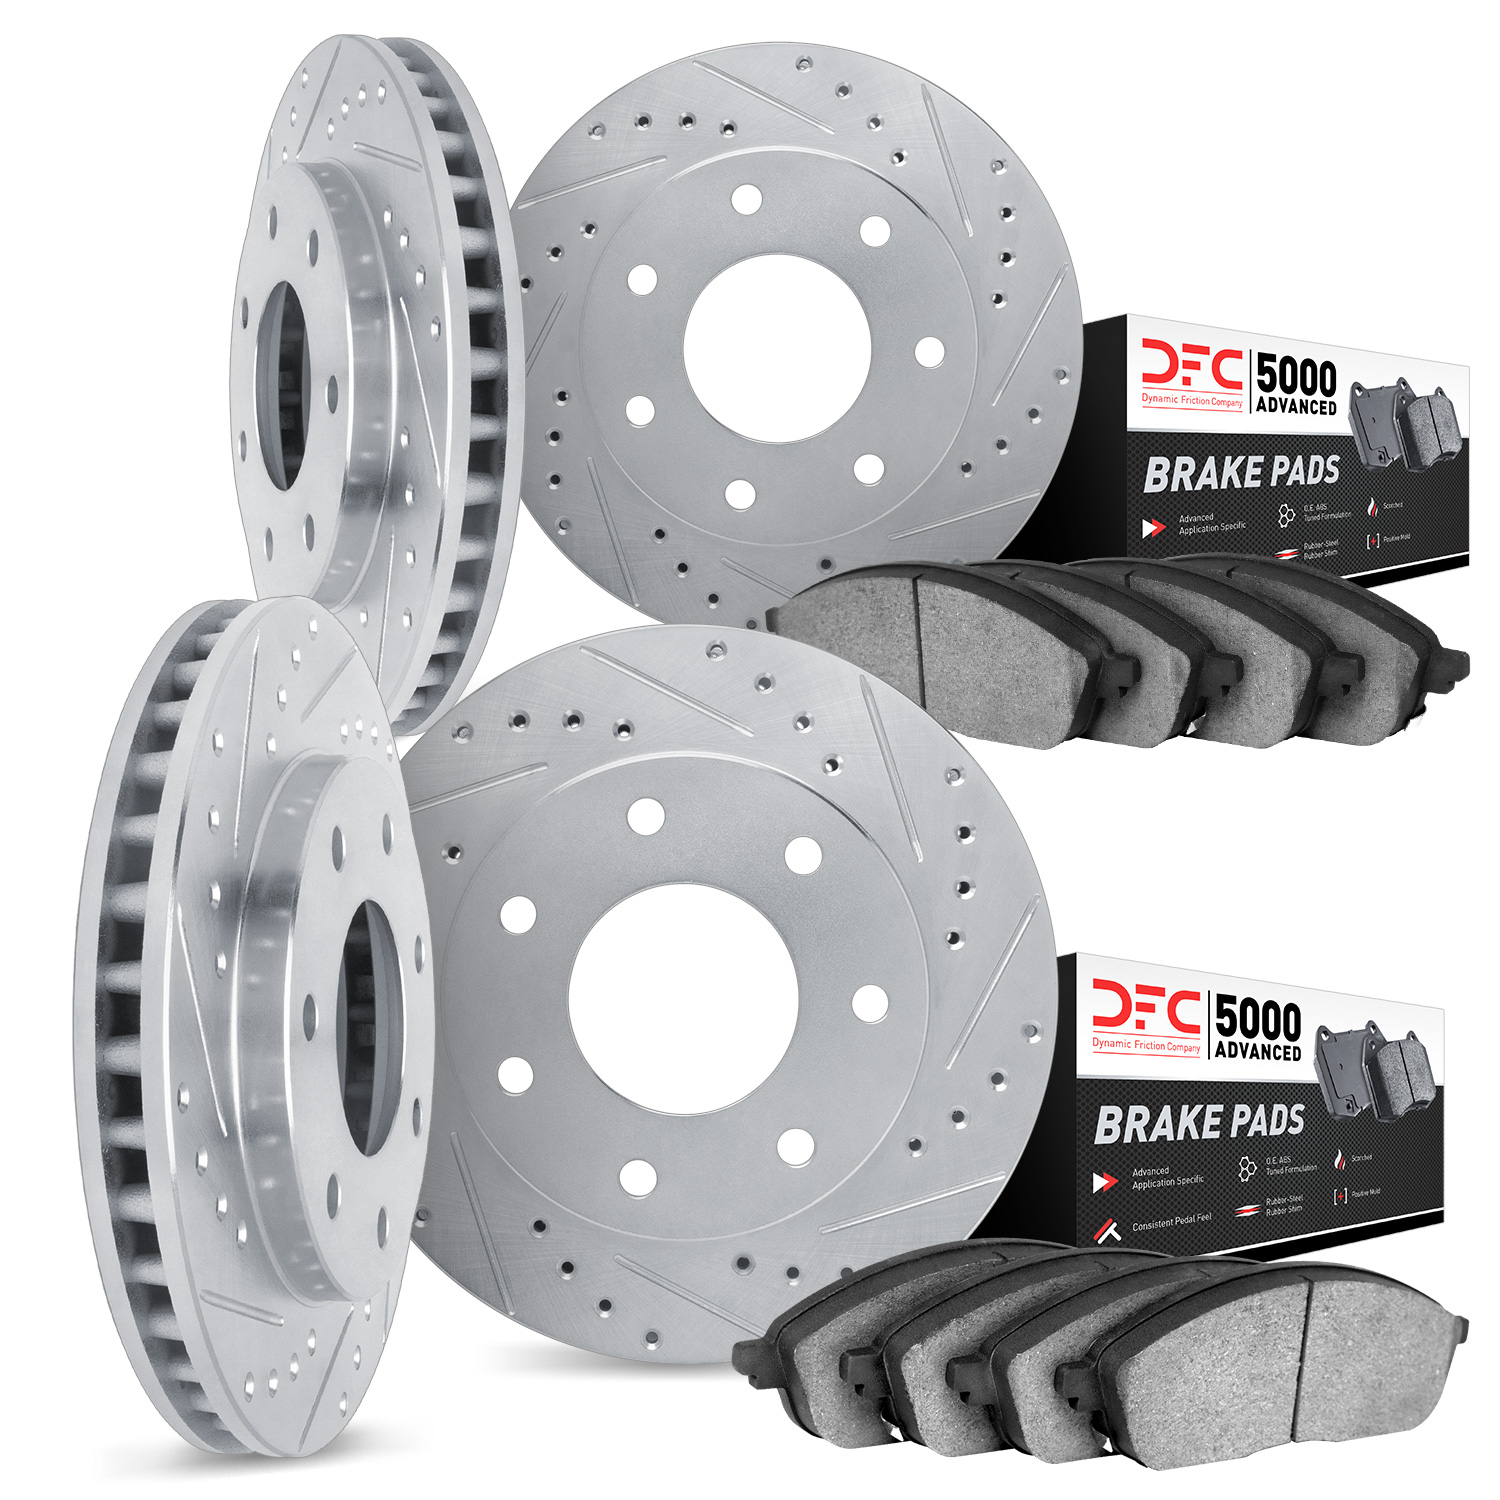 7504-54351 Drilled/Slotted Brake Rotors w/5000 Advanced Brake Pads Kit [Silver], 2004-2008 Ford/Lincoln/Mercury/Mazda, Position: